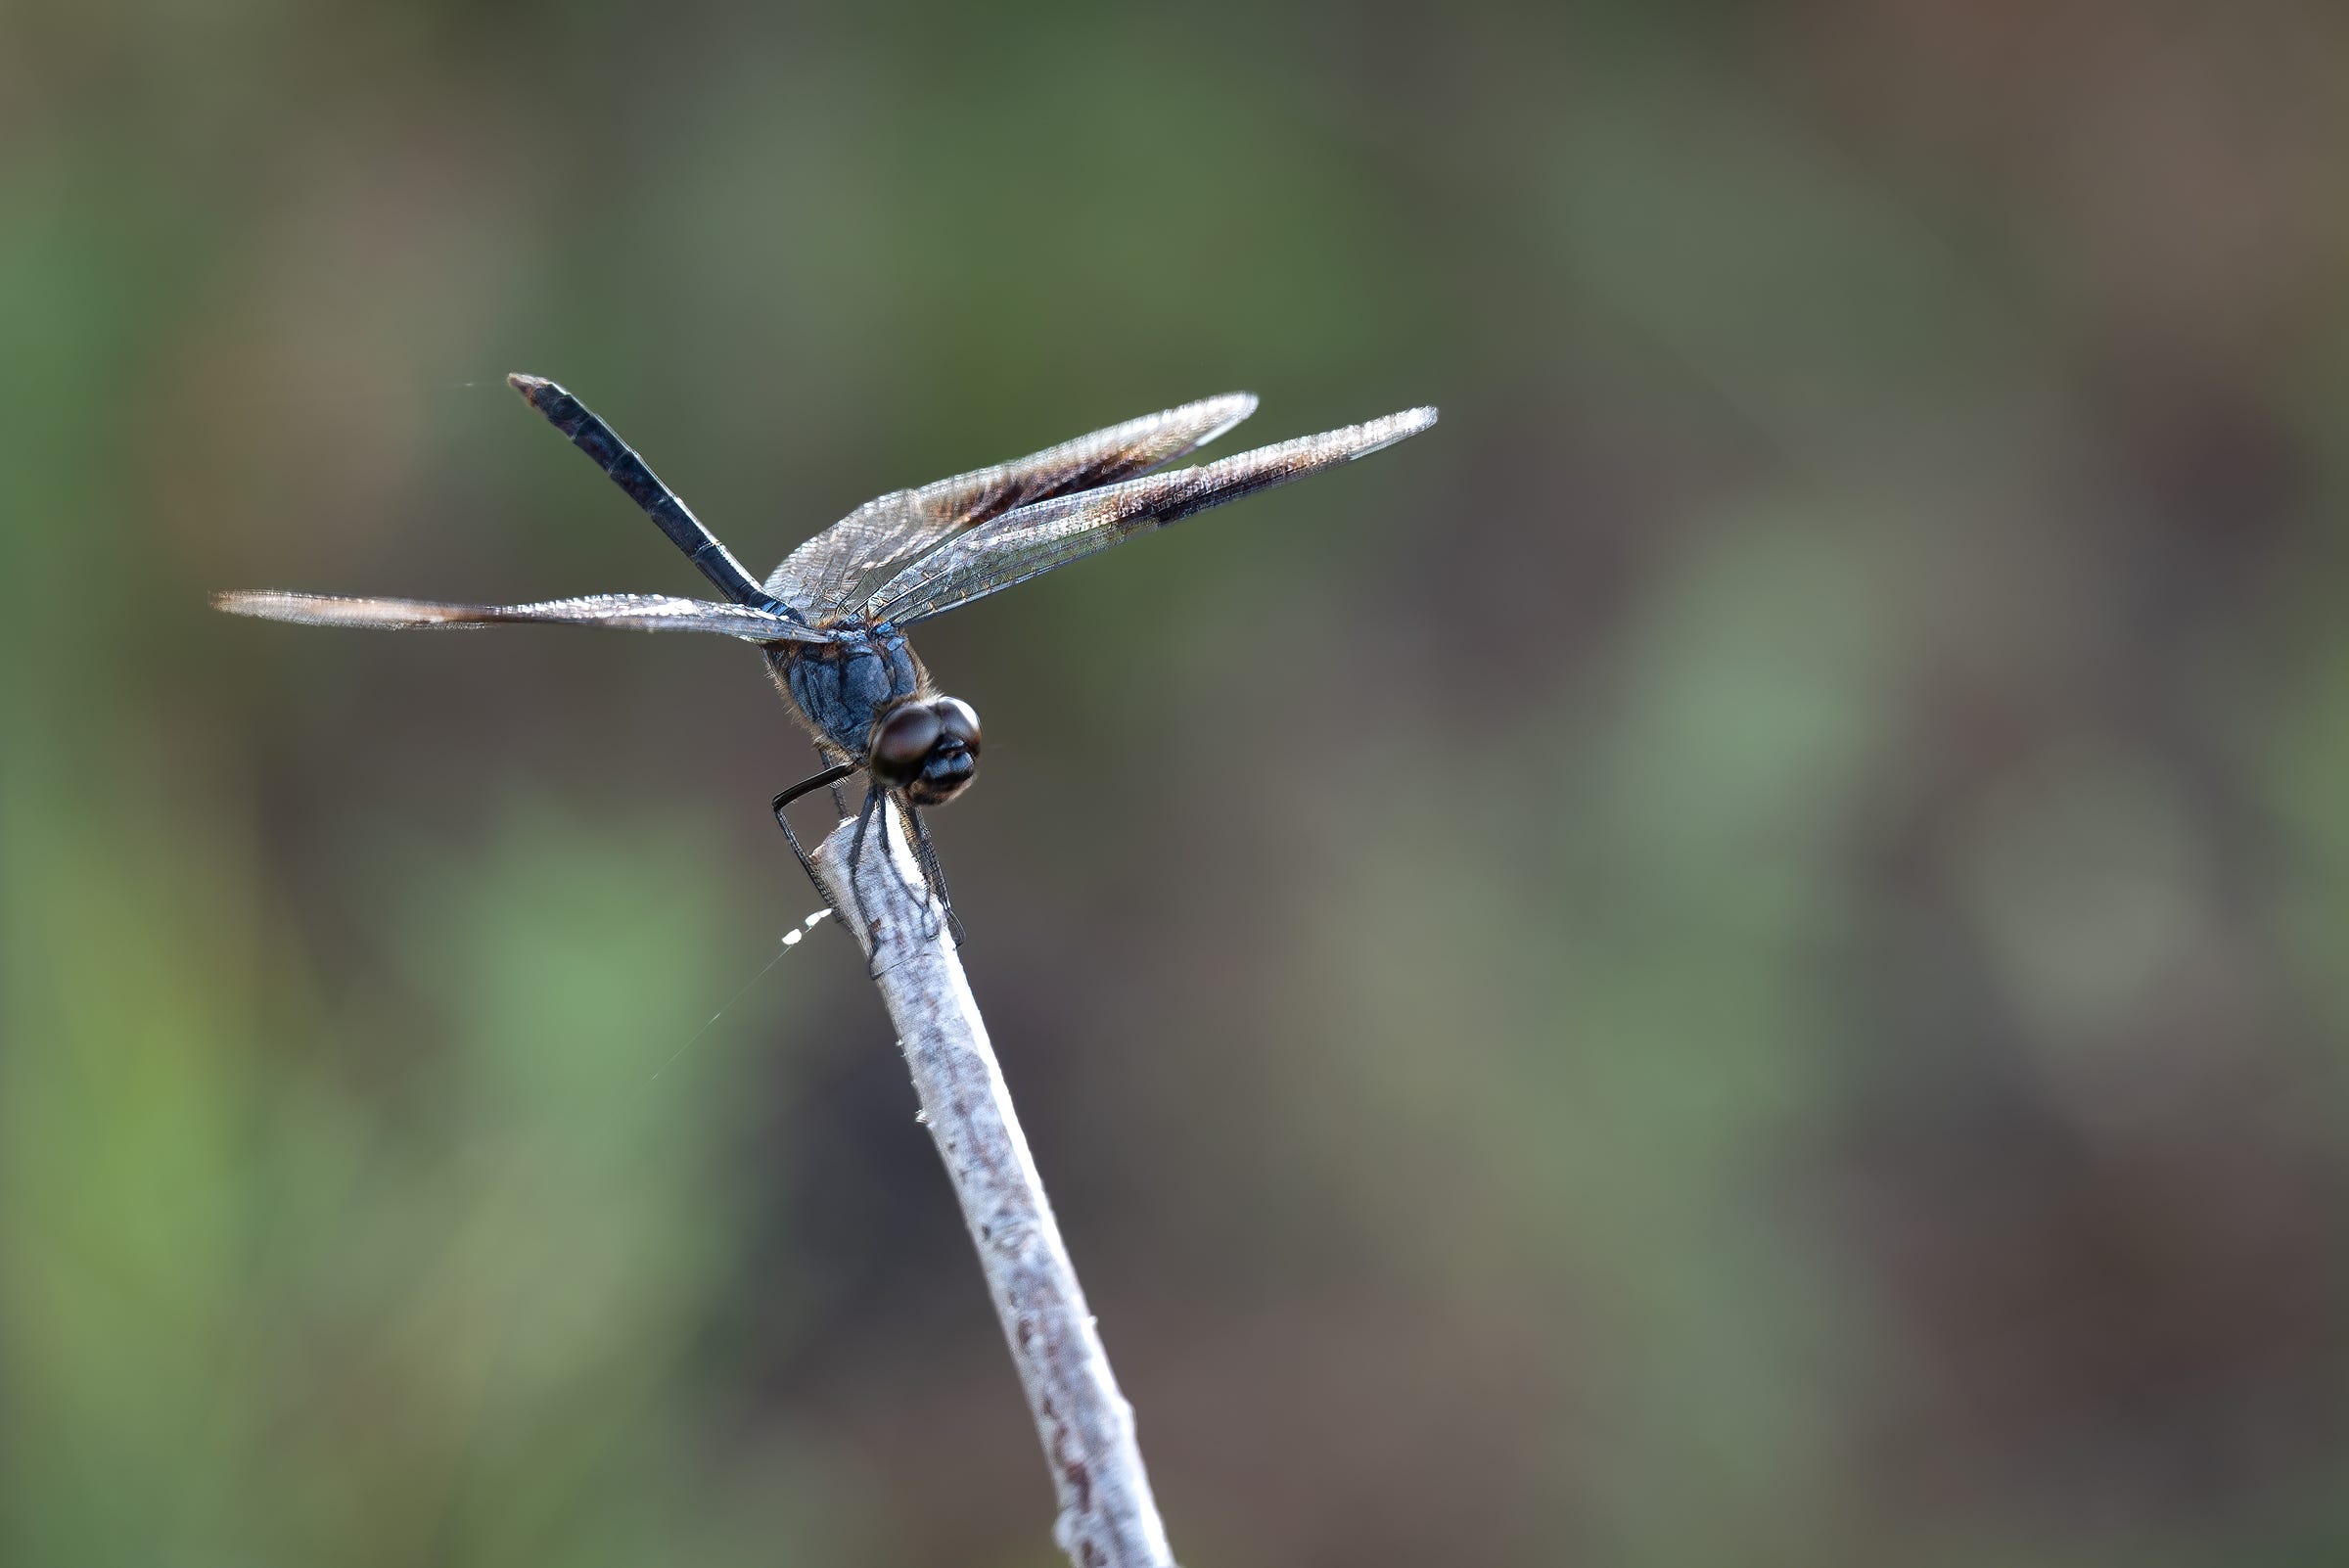 A dragonfly sis perched on a stick with the background blurred